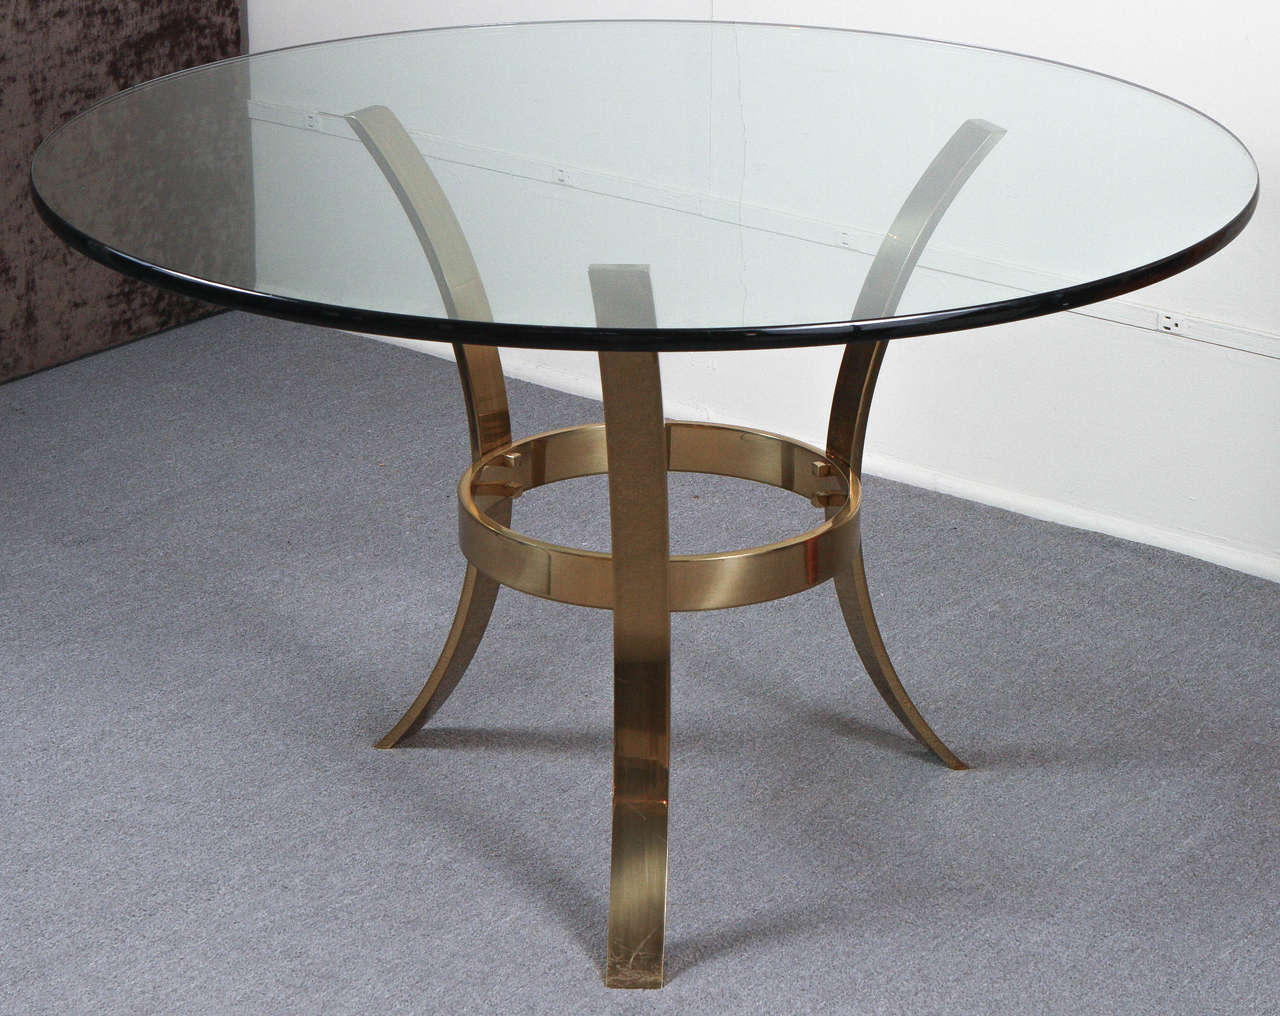 Large entry table with a beefy tripod base of polished brass and a circular glass top.
The base is detailed with bolts that have cubed heads.